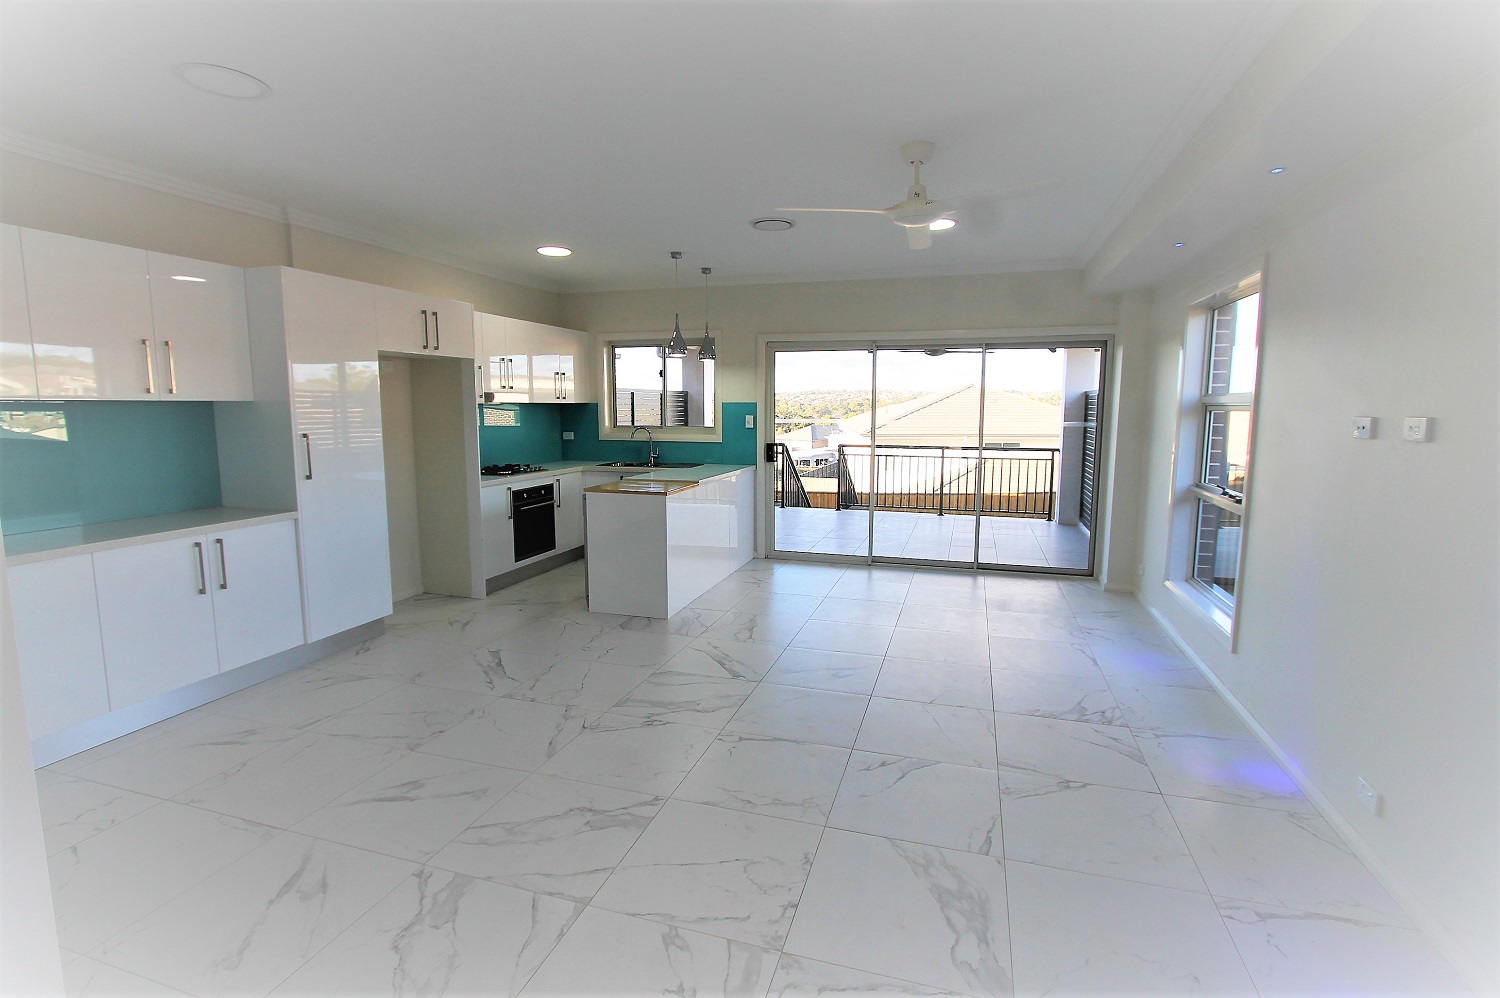 Blacktown Property for sale